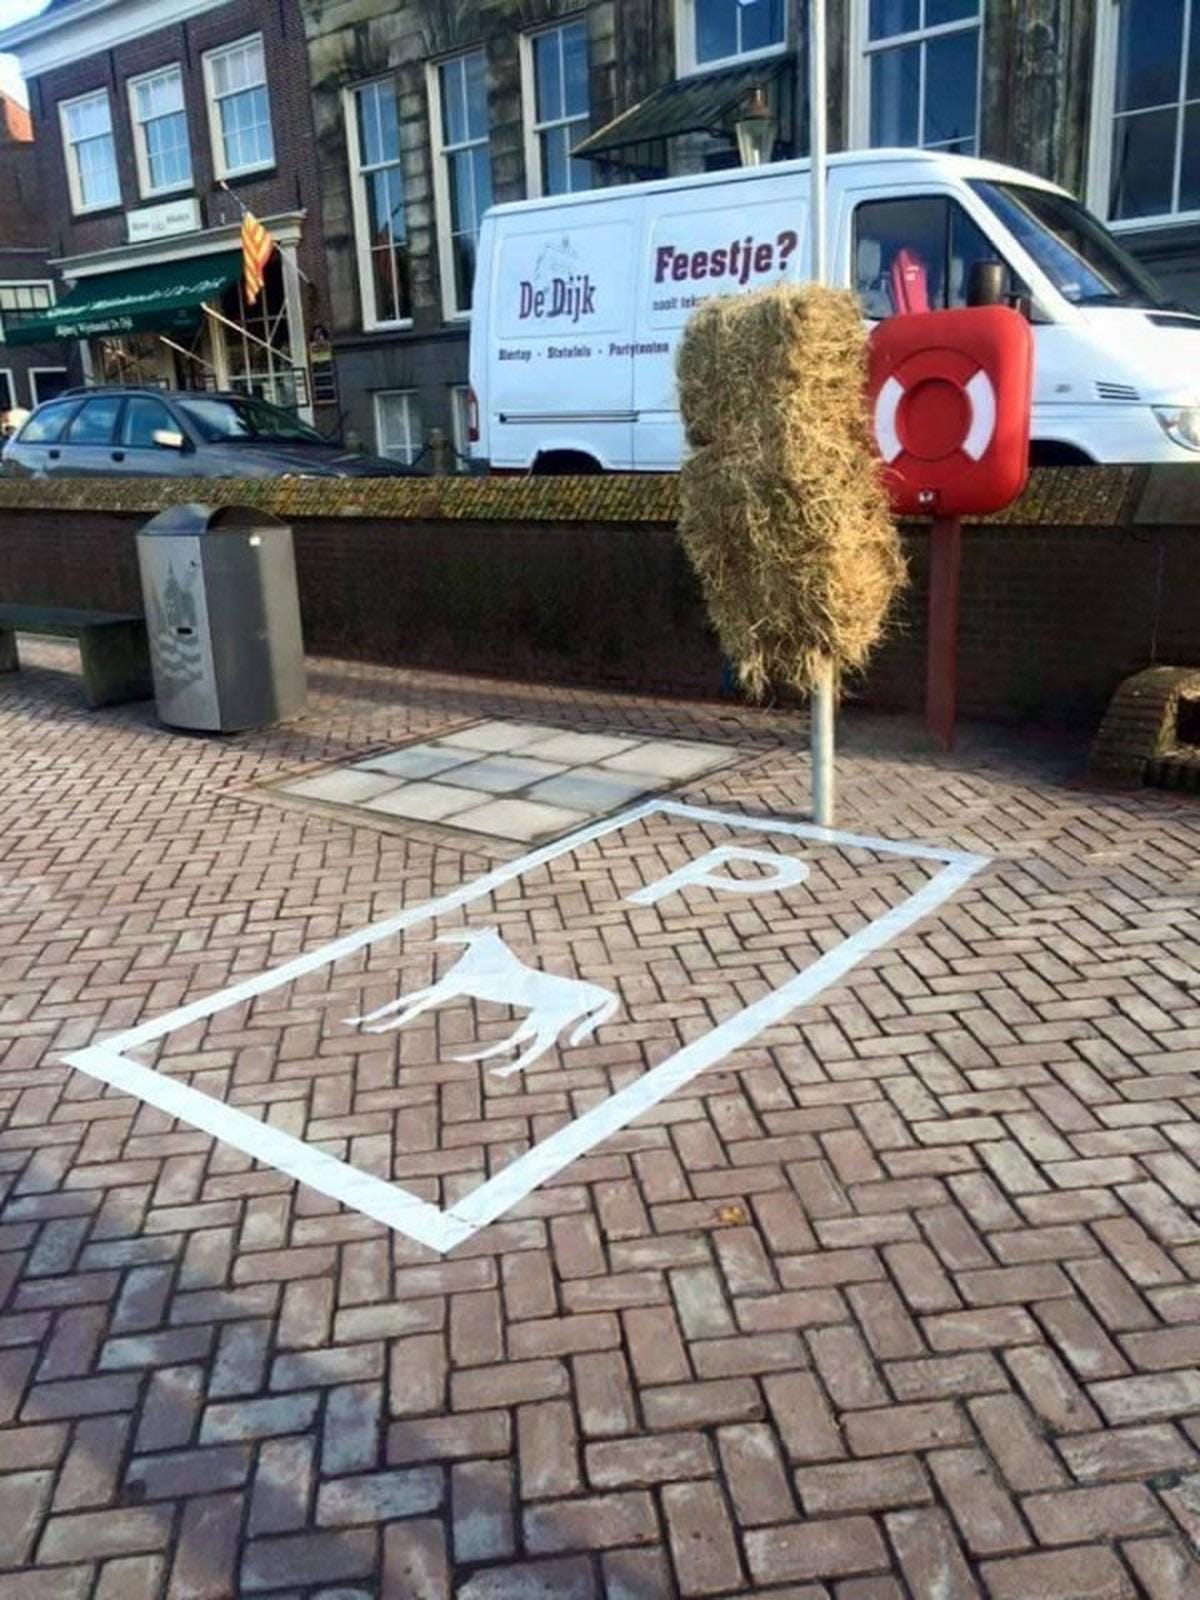 Actual Horse parking spot in the Netherlands. : r/interestingasfuck